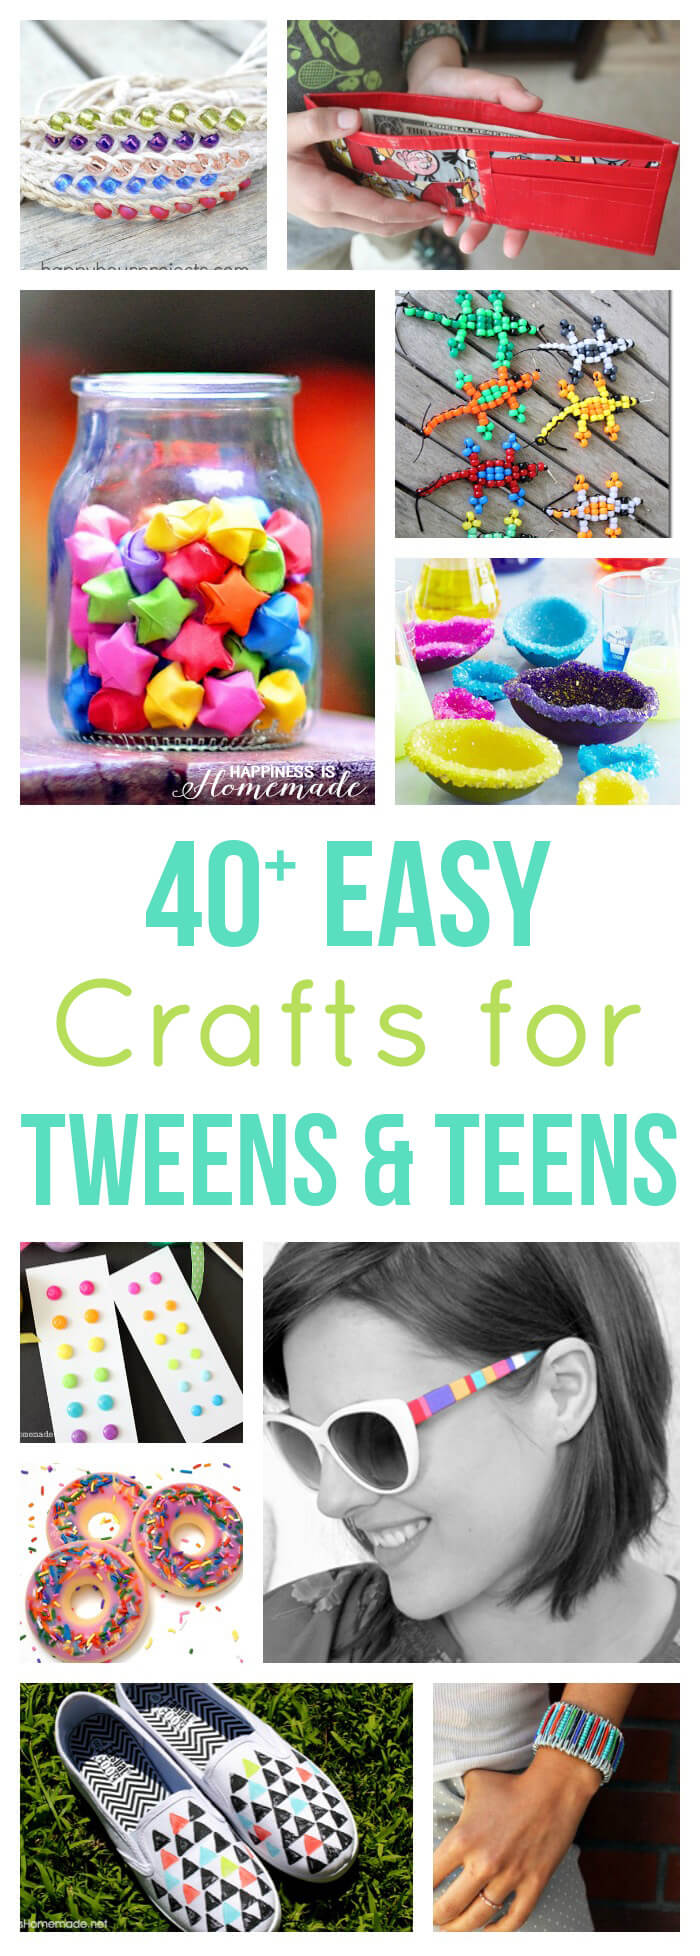 40+ easy crafts for tweens and teens